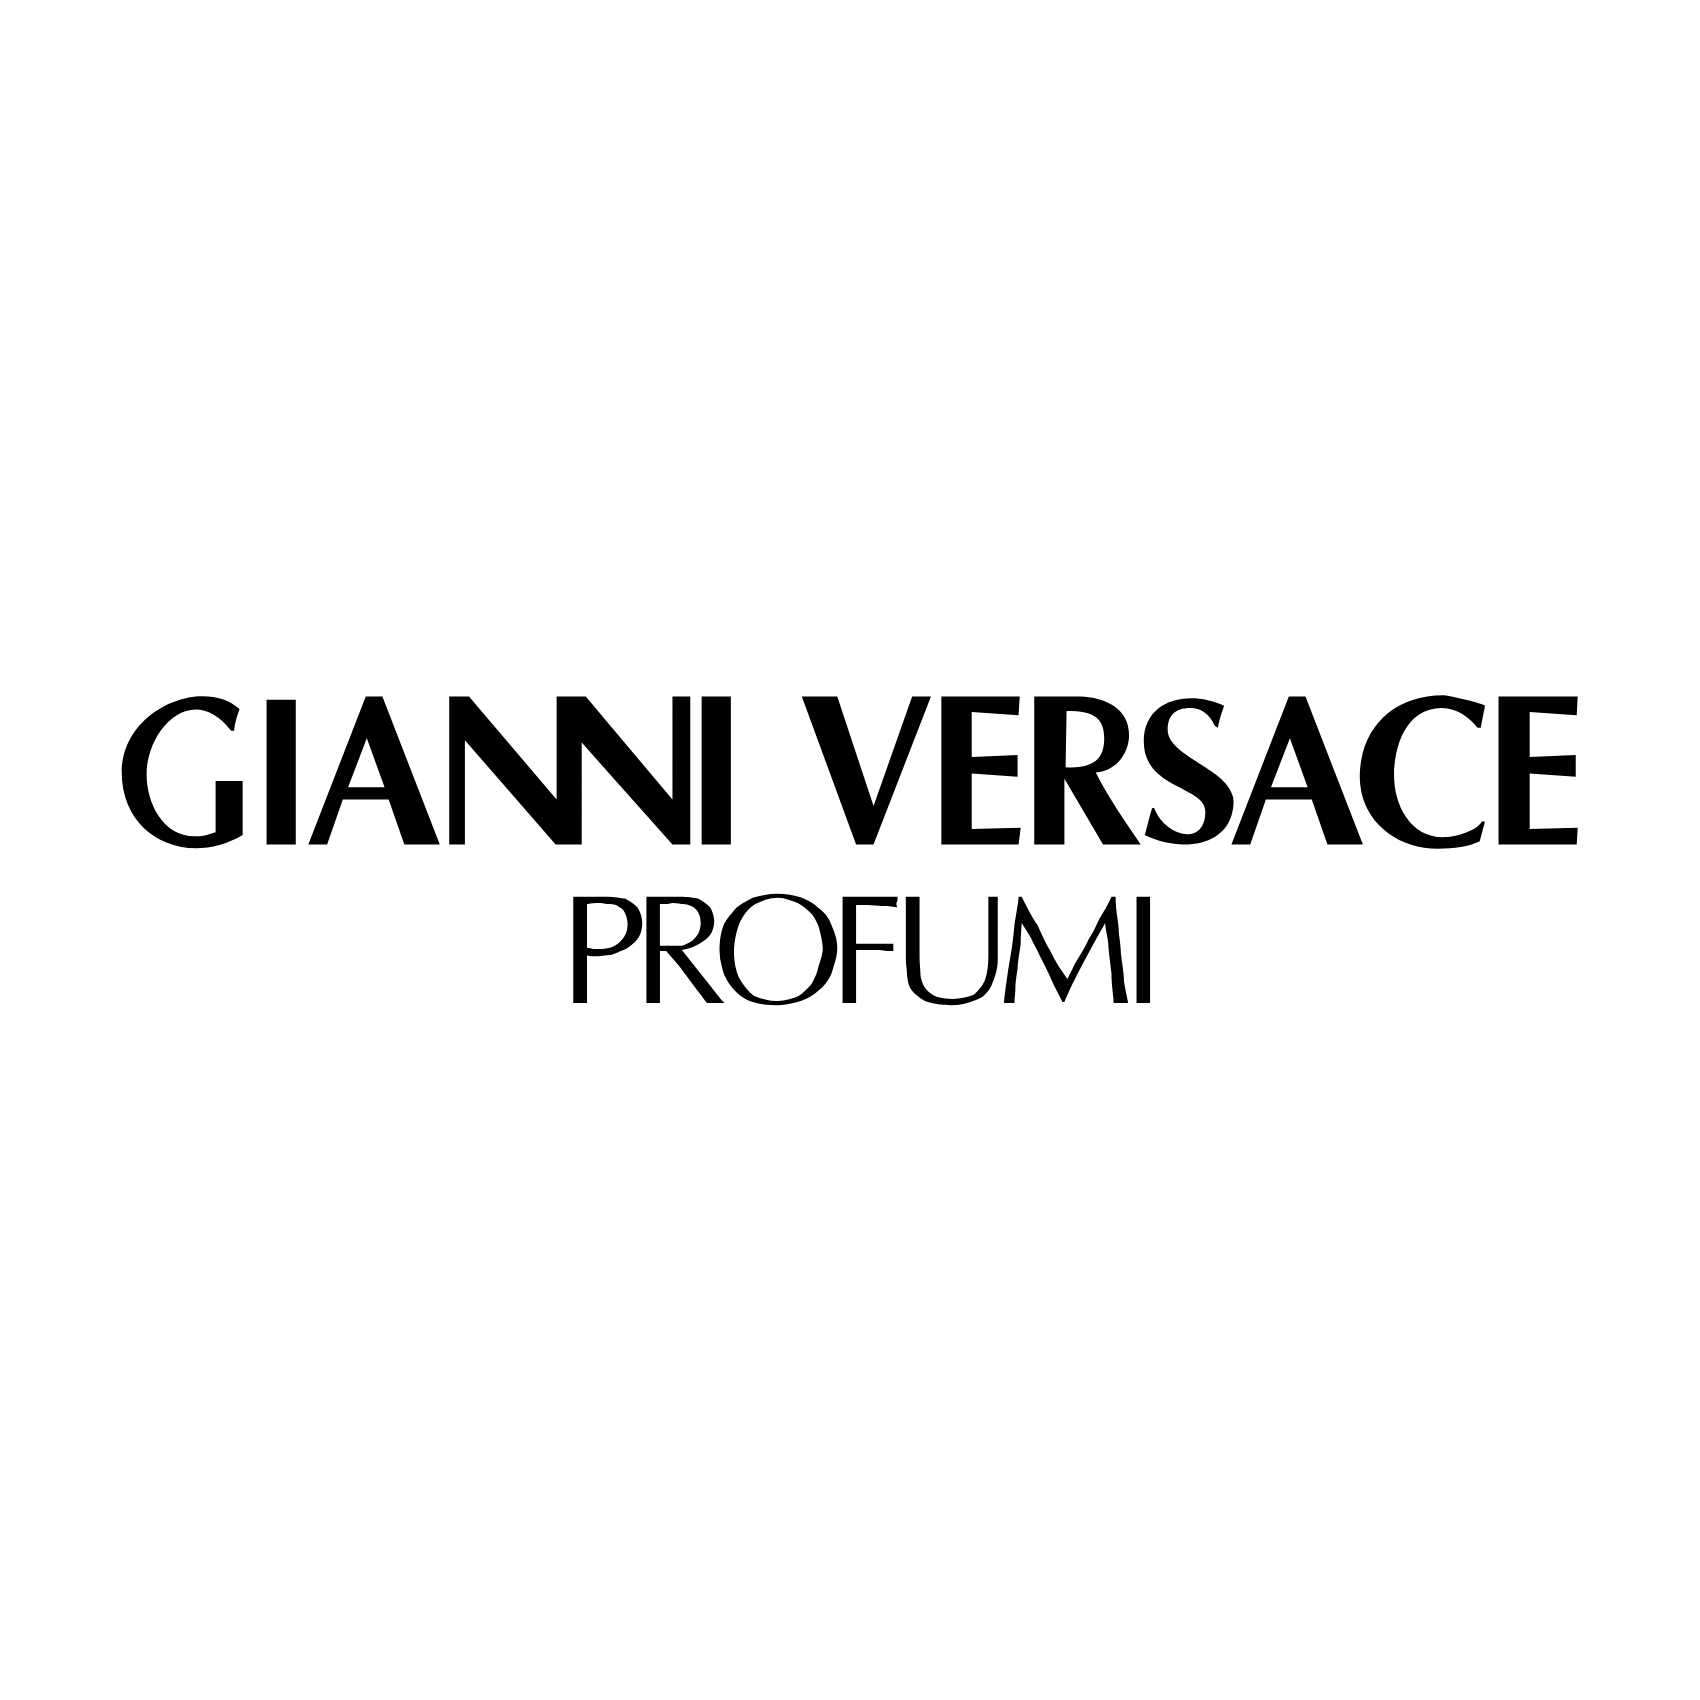 Download Gianni Versace Logo PNG and Vector (PDF, SVG, Ai, EPS) Free